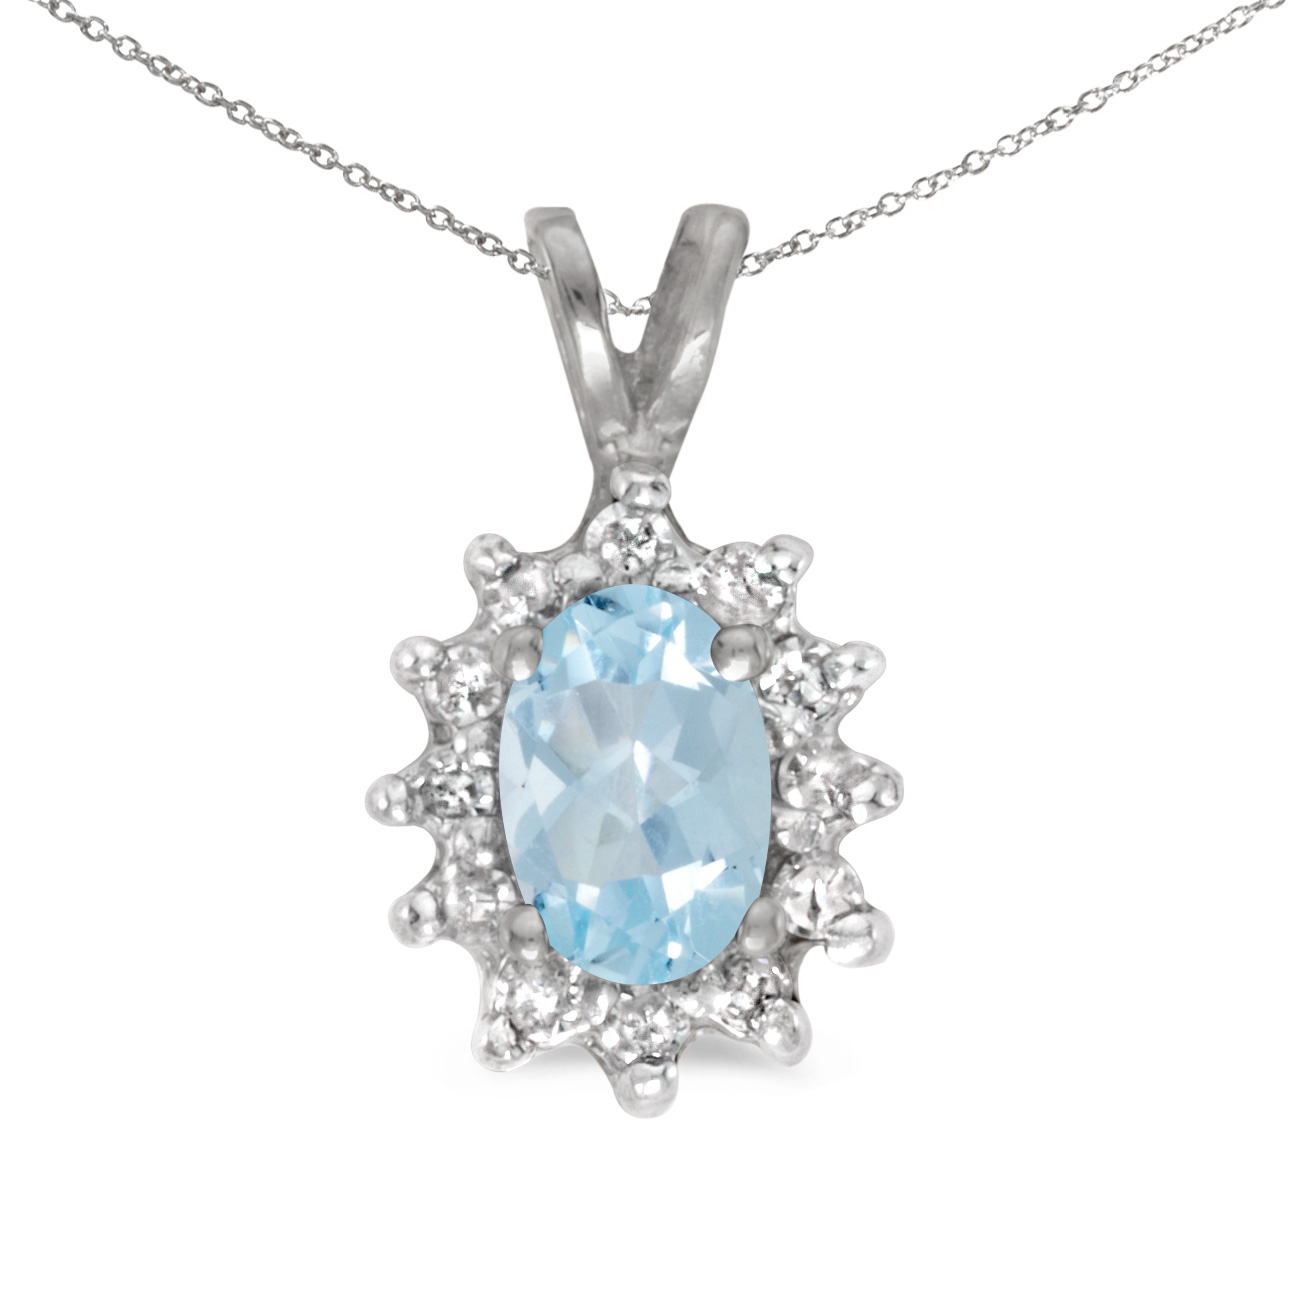 This 14k white gold oval aquamarine and diamond pendant features a 6x4 mm genuine natural aquamar...